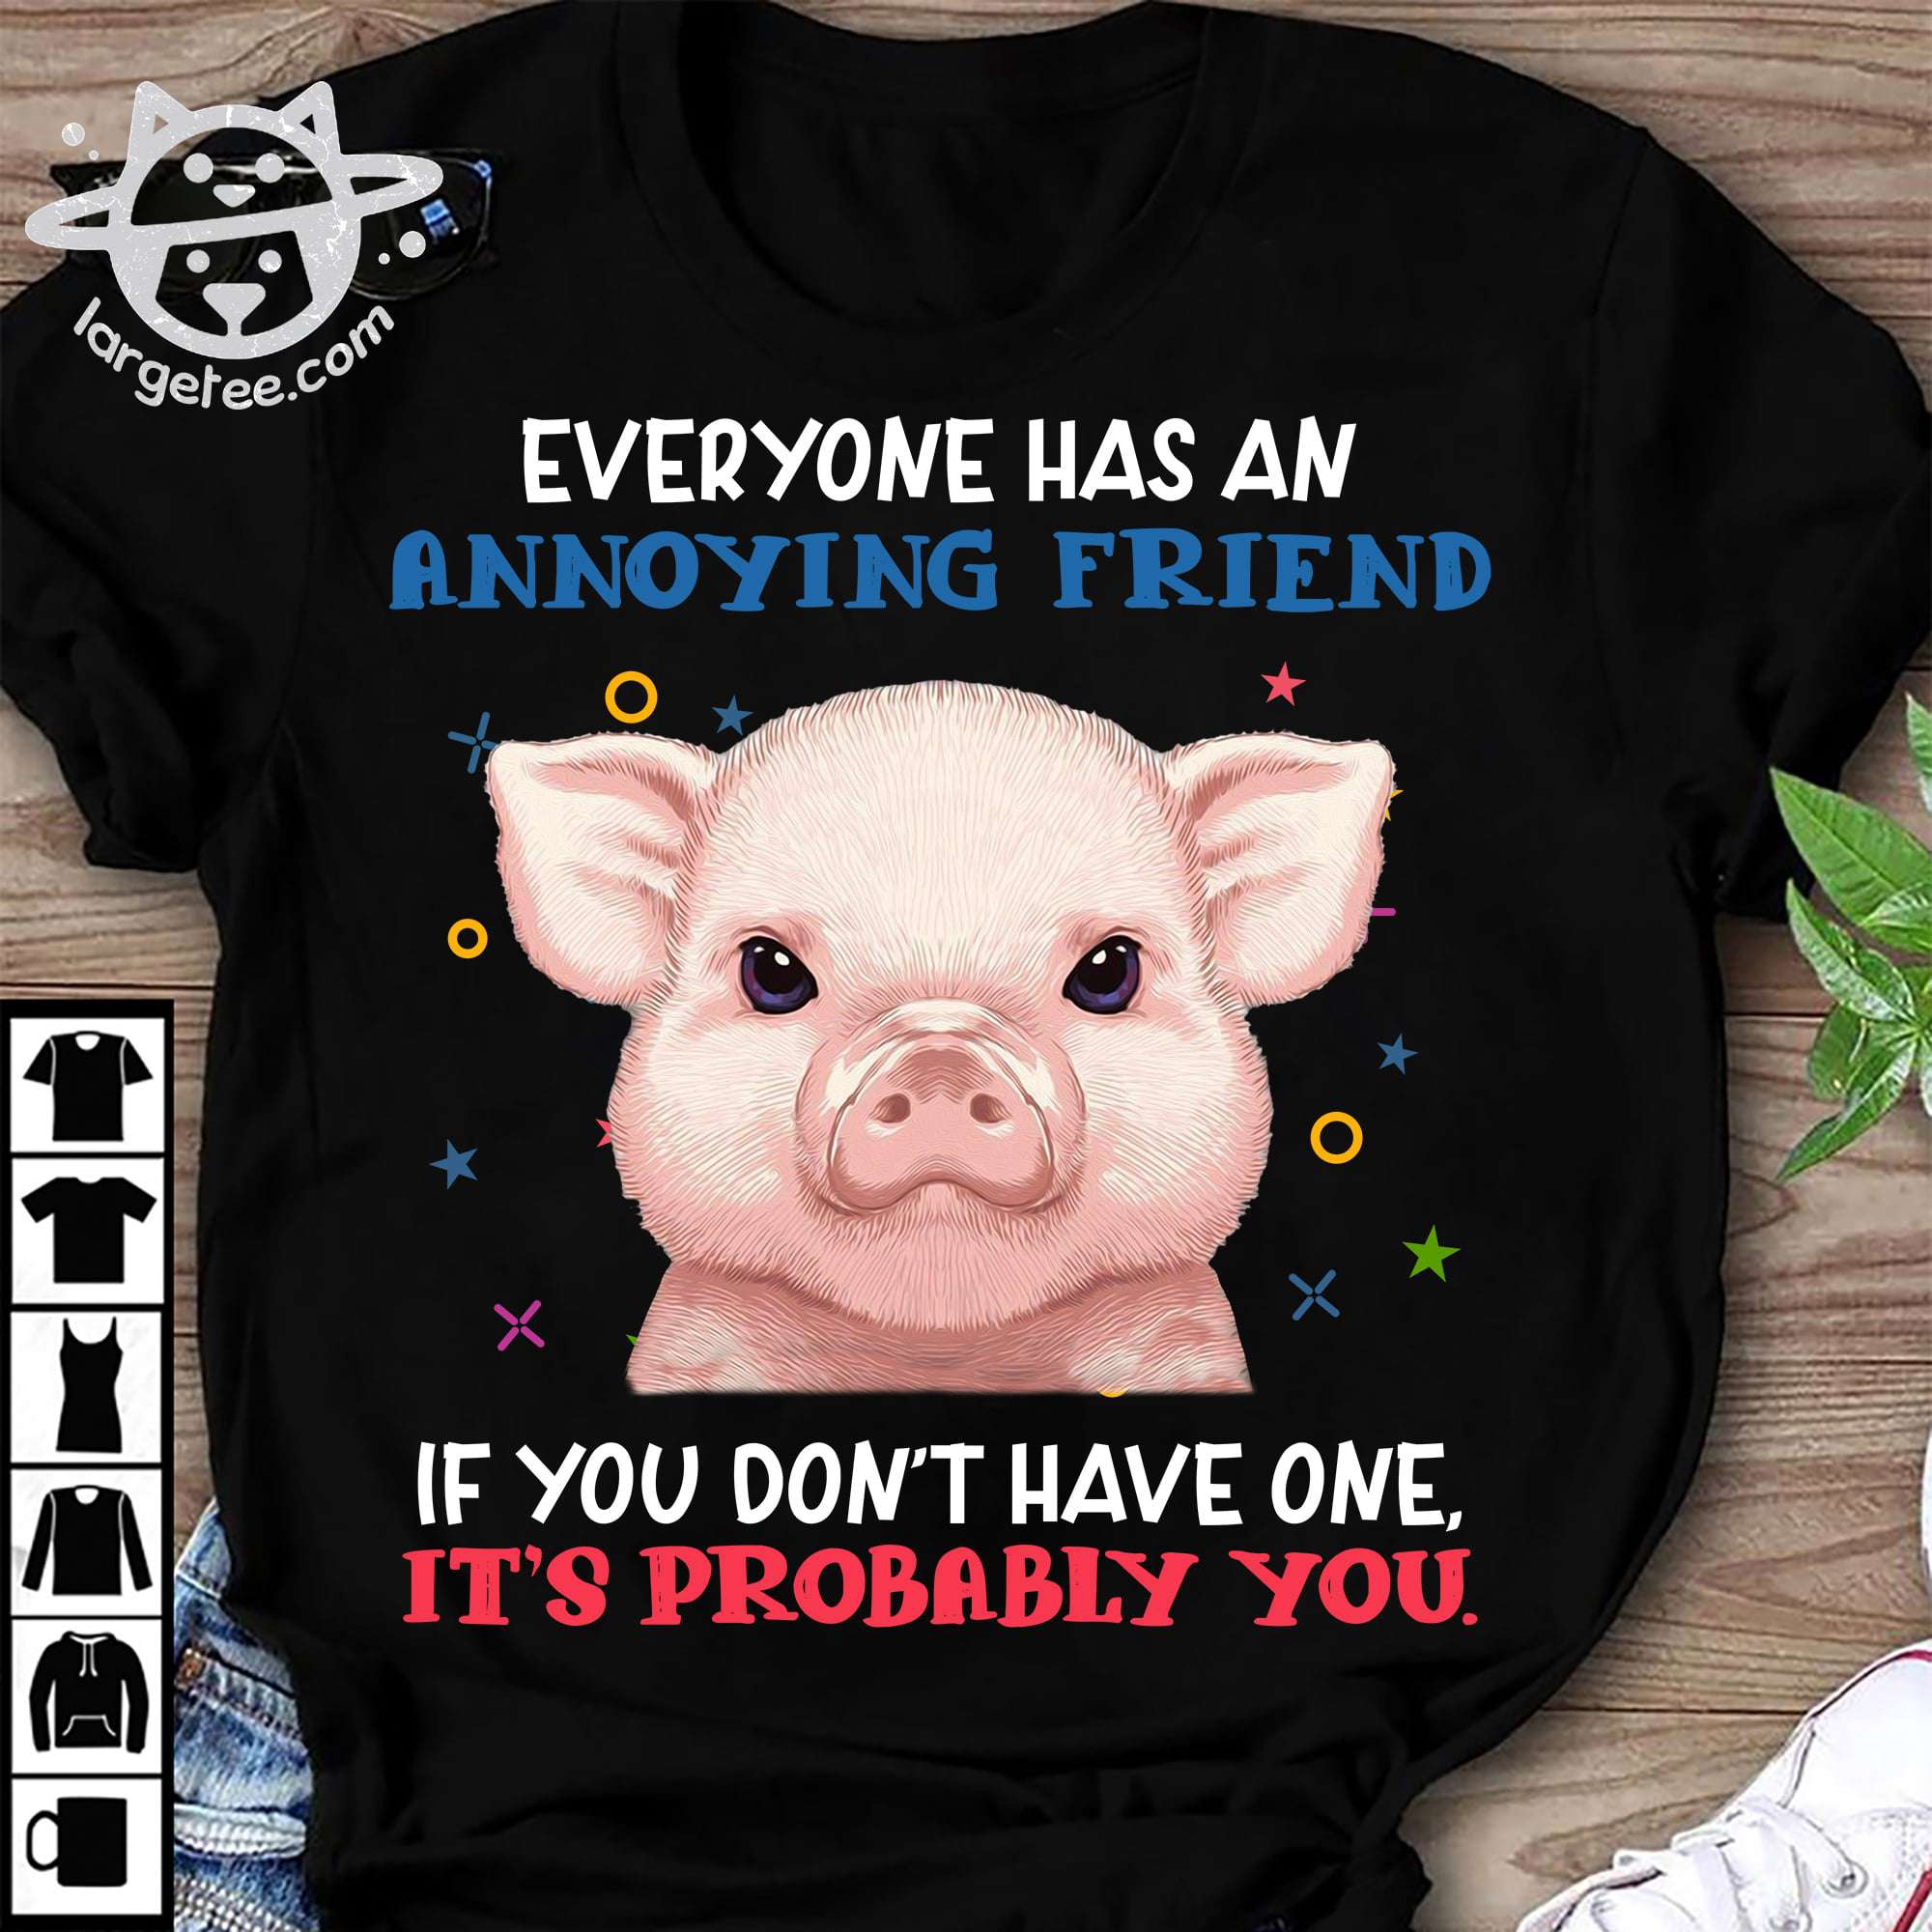 Little Pig, The pig tees gift - Everyone has an annoying friend if you don't have one it's probably you